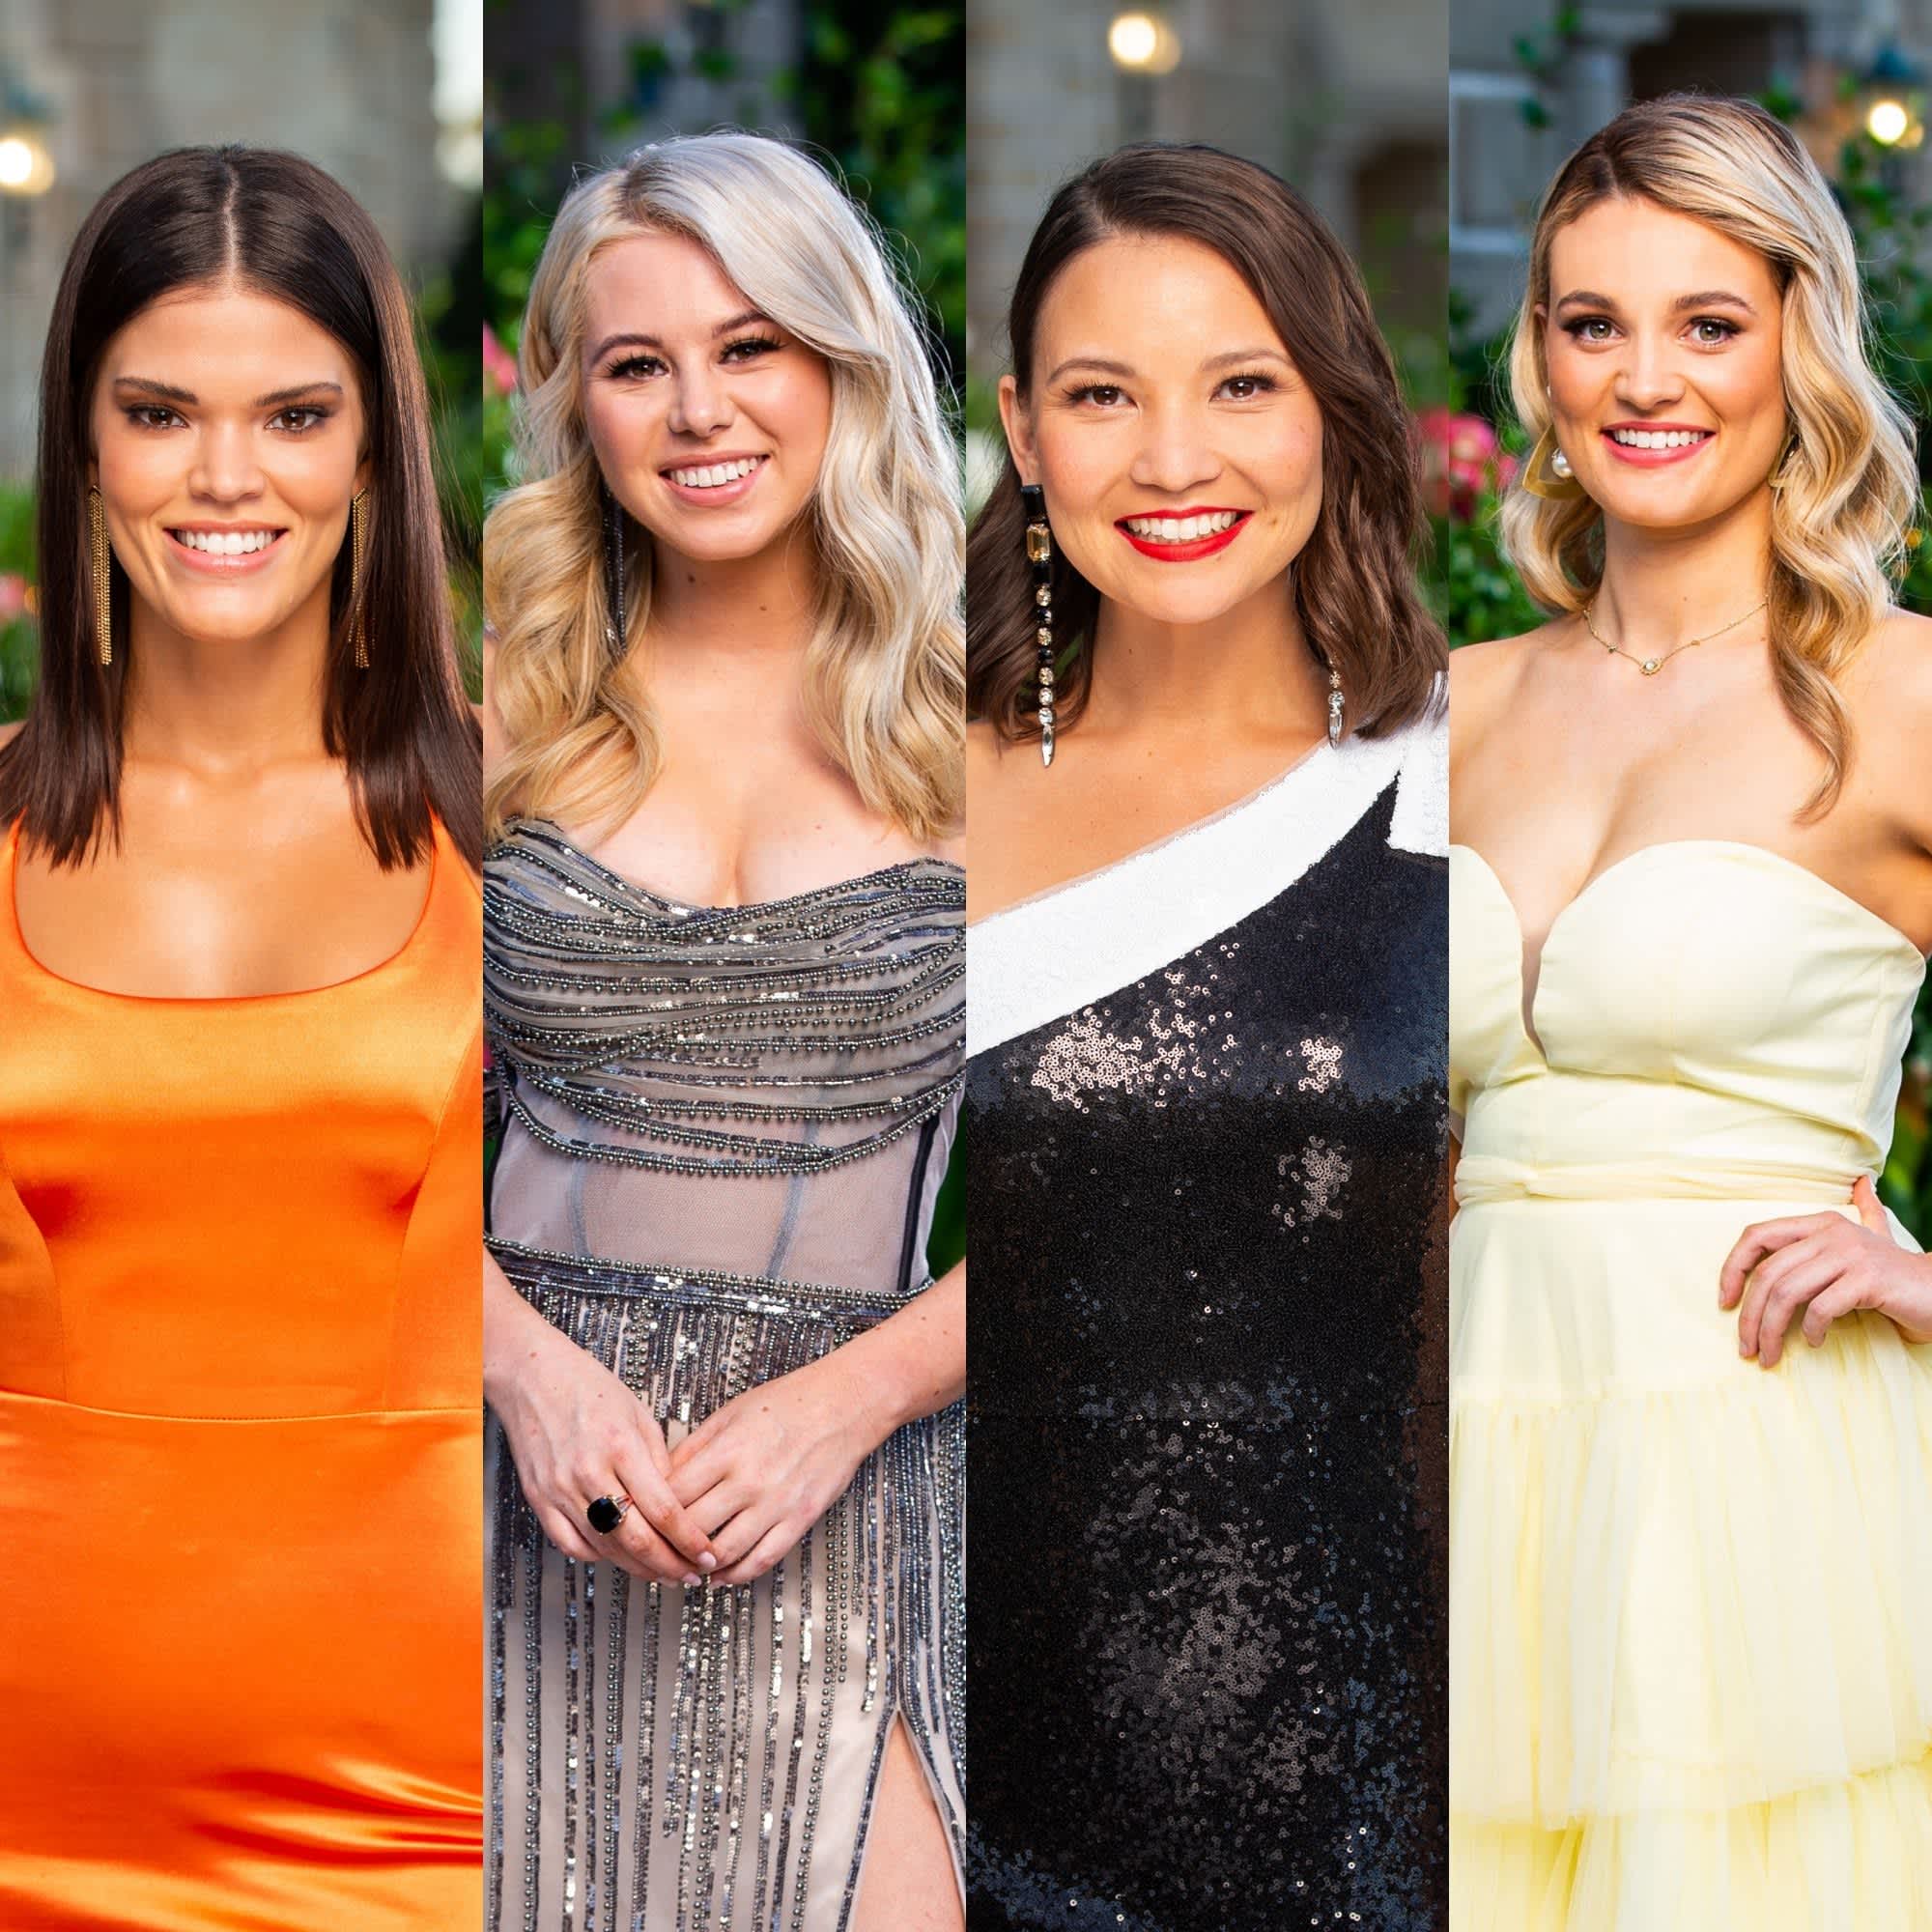 "He Has a Tough Choice to Make" The Eliminated Bachelor Ladies Reveal